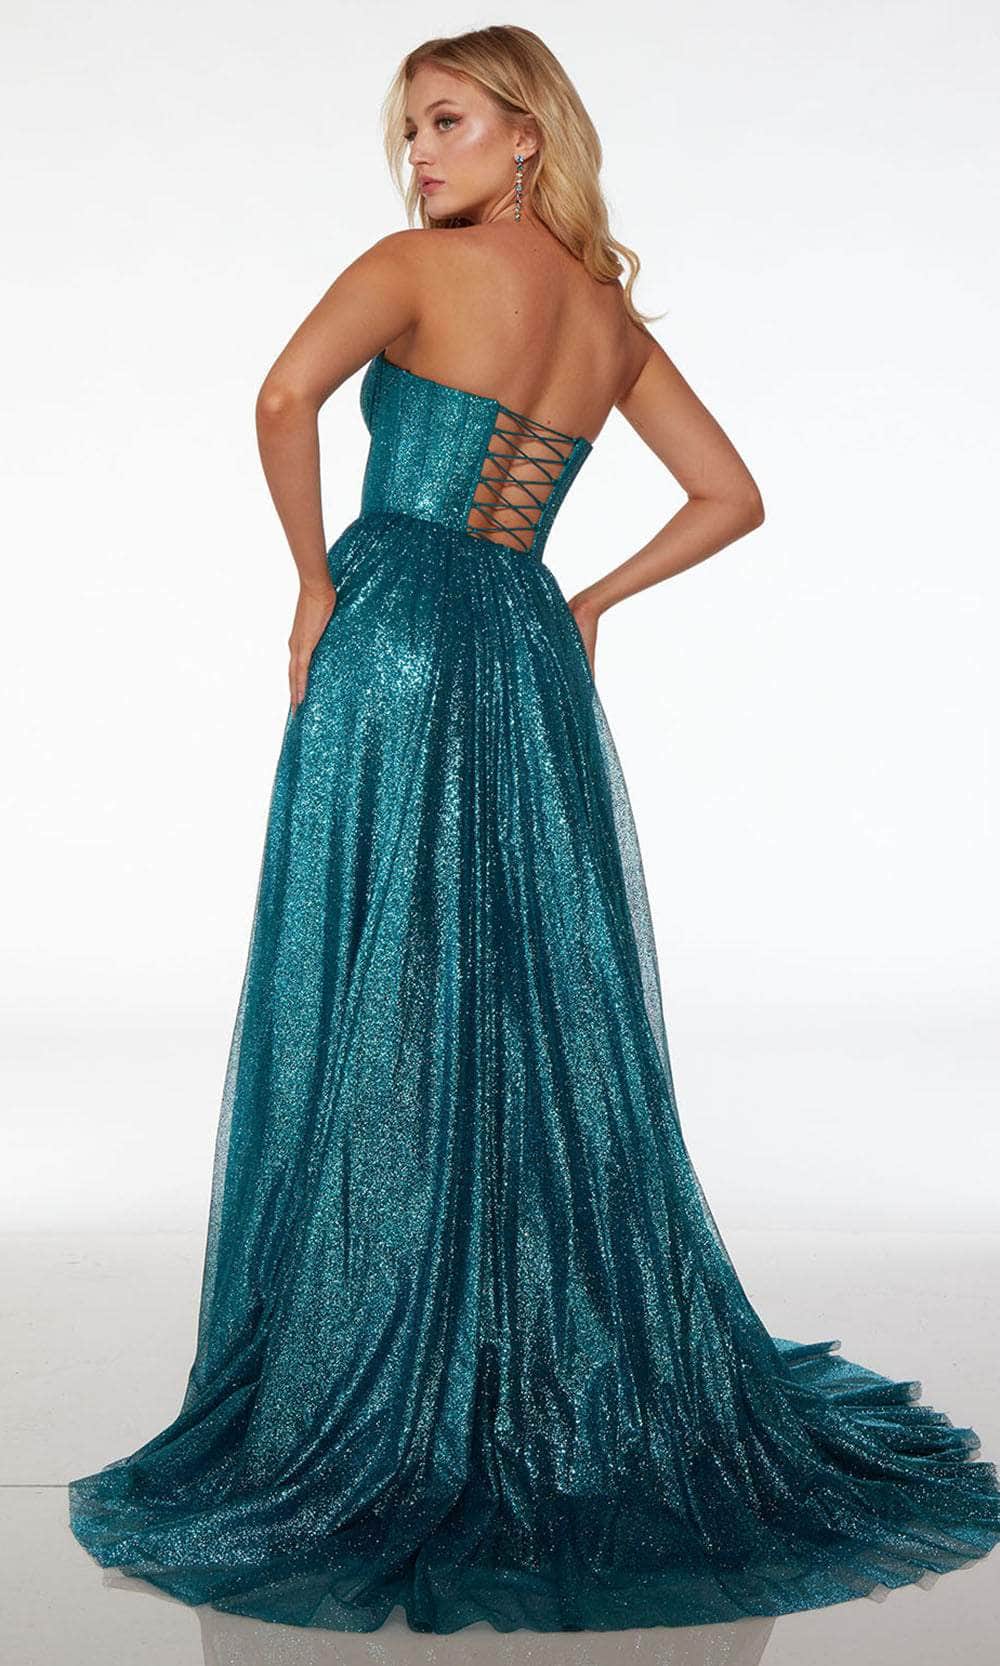 Alyce Paris 61601 - Corset Prom Dress with Slit Special Occasion Dresses